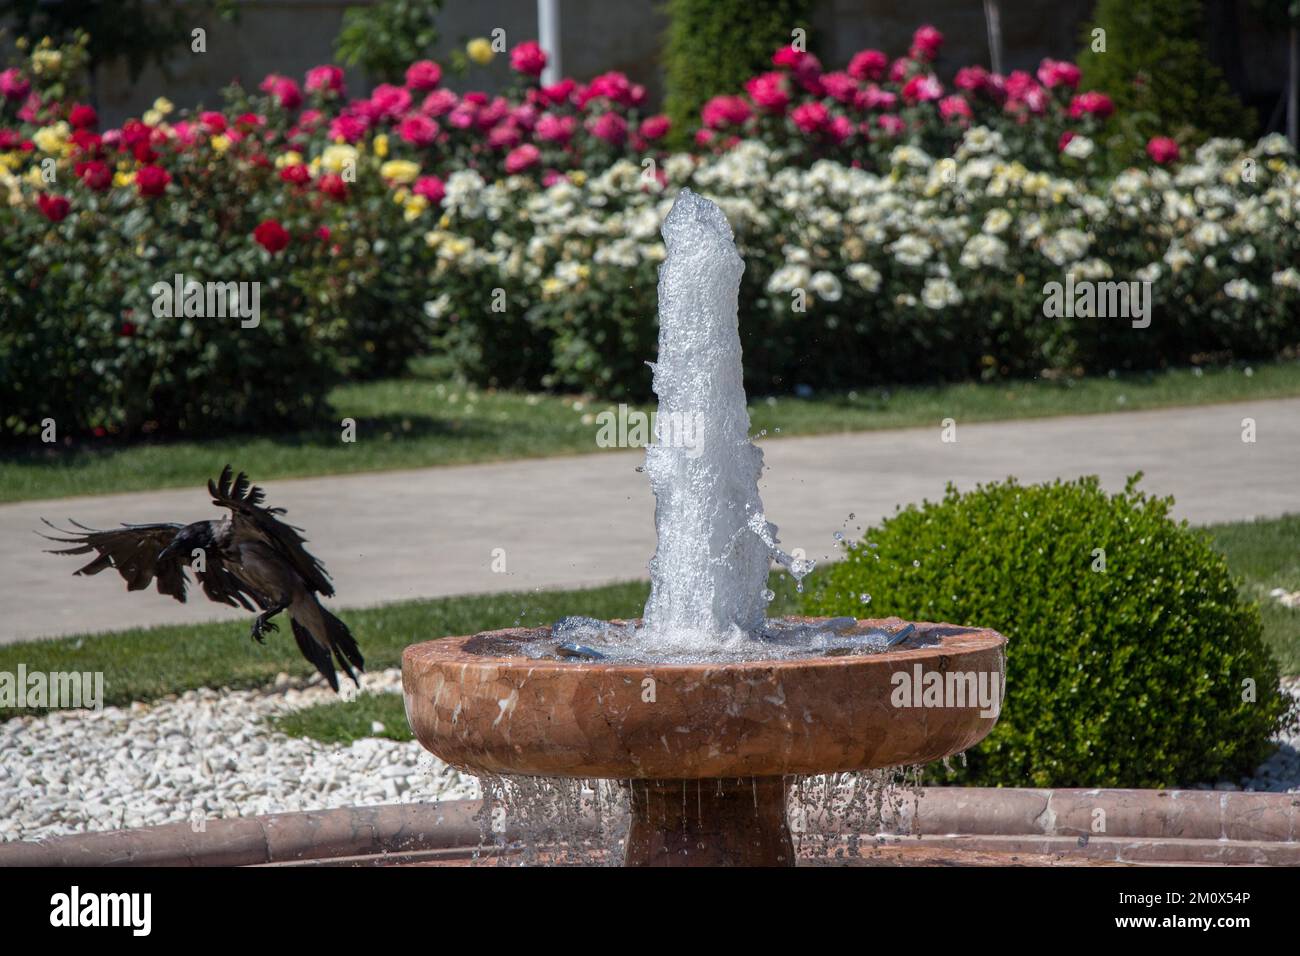 Crow by the side of gushing water in the rose garden Stock Photo